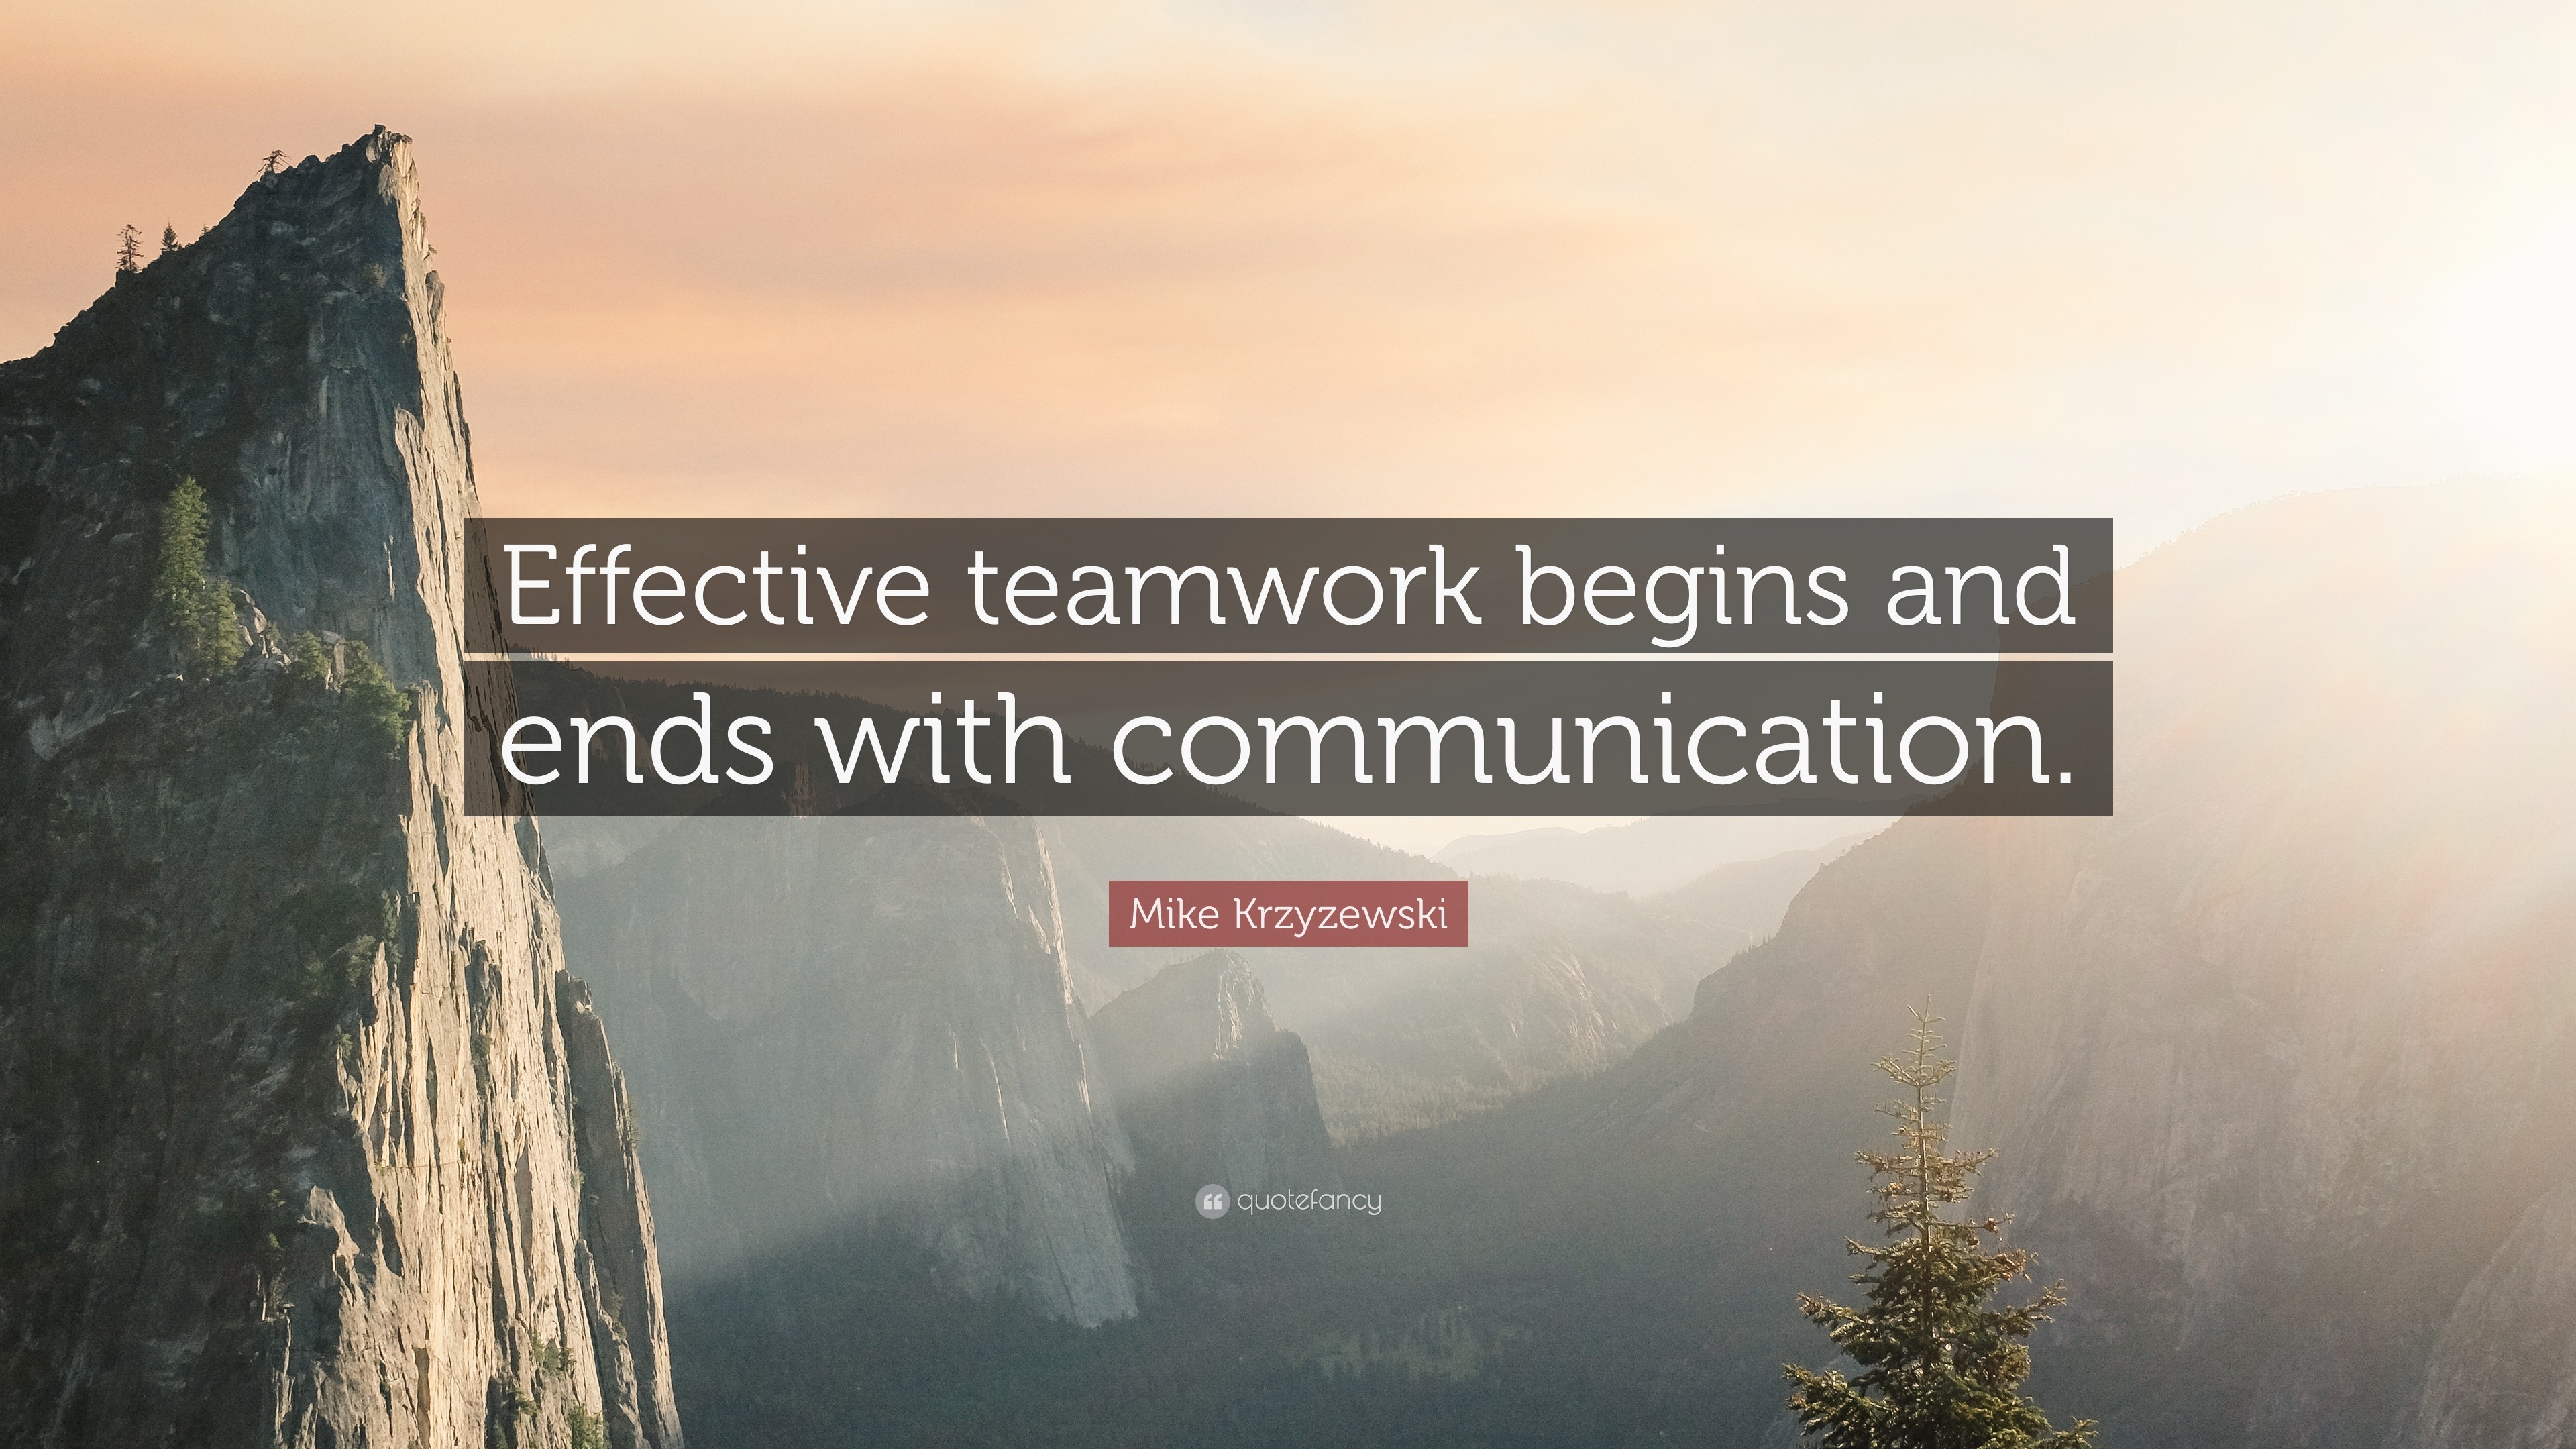 Best Communication Quotes For Work of the decade The ultimate guide ...